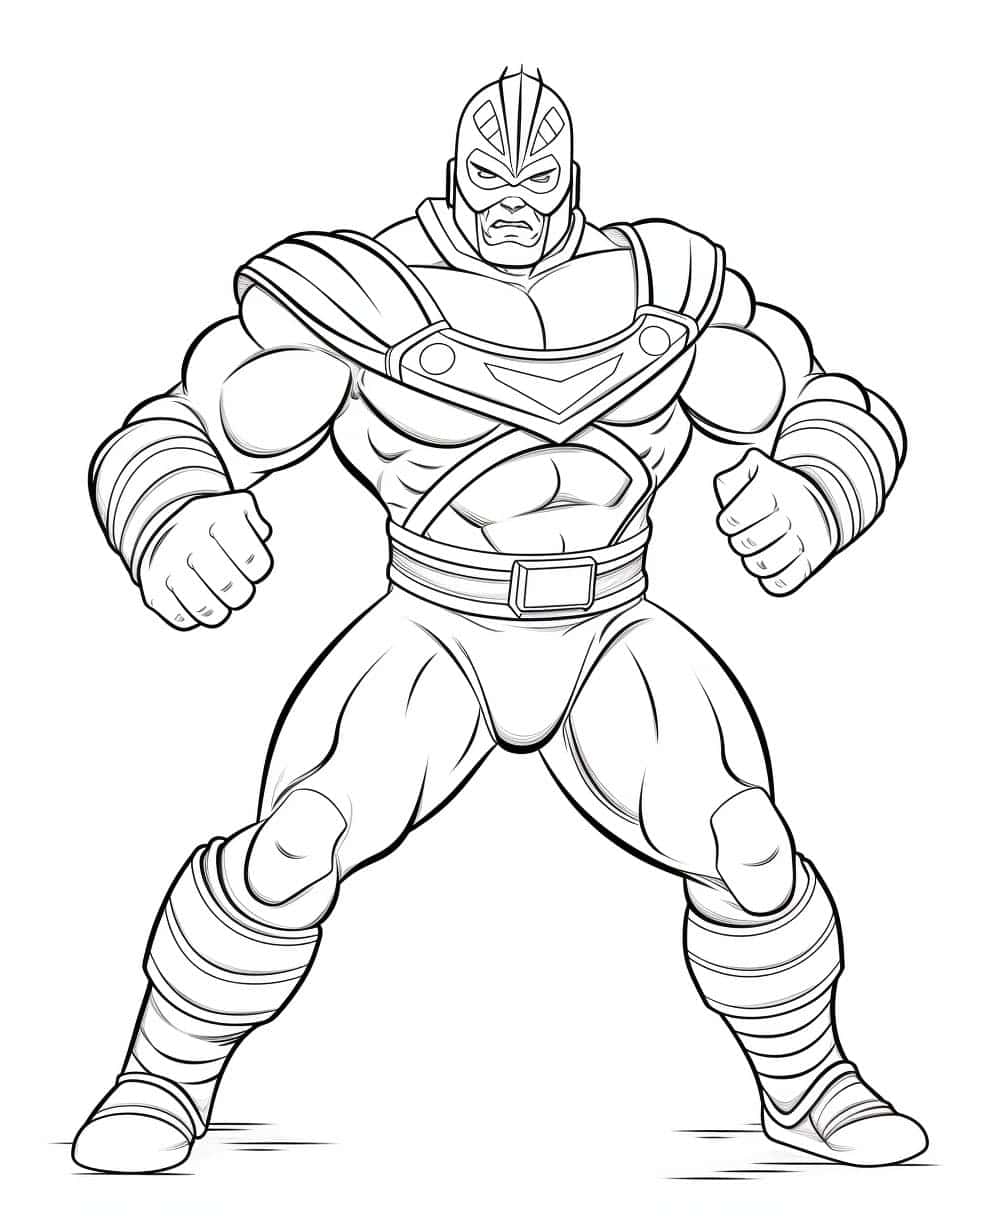 WWE pictures to color (free & printable)